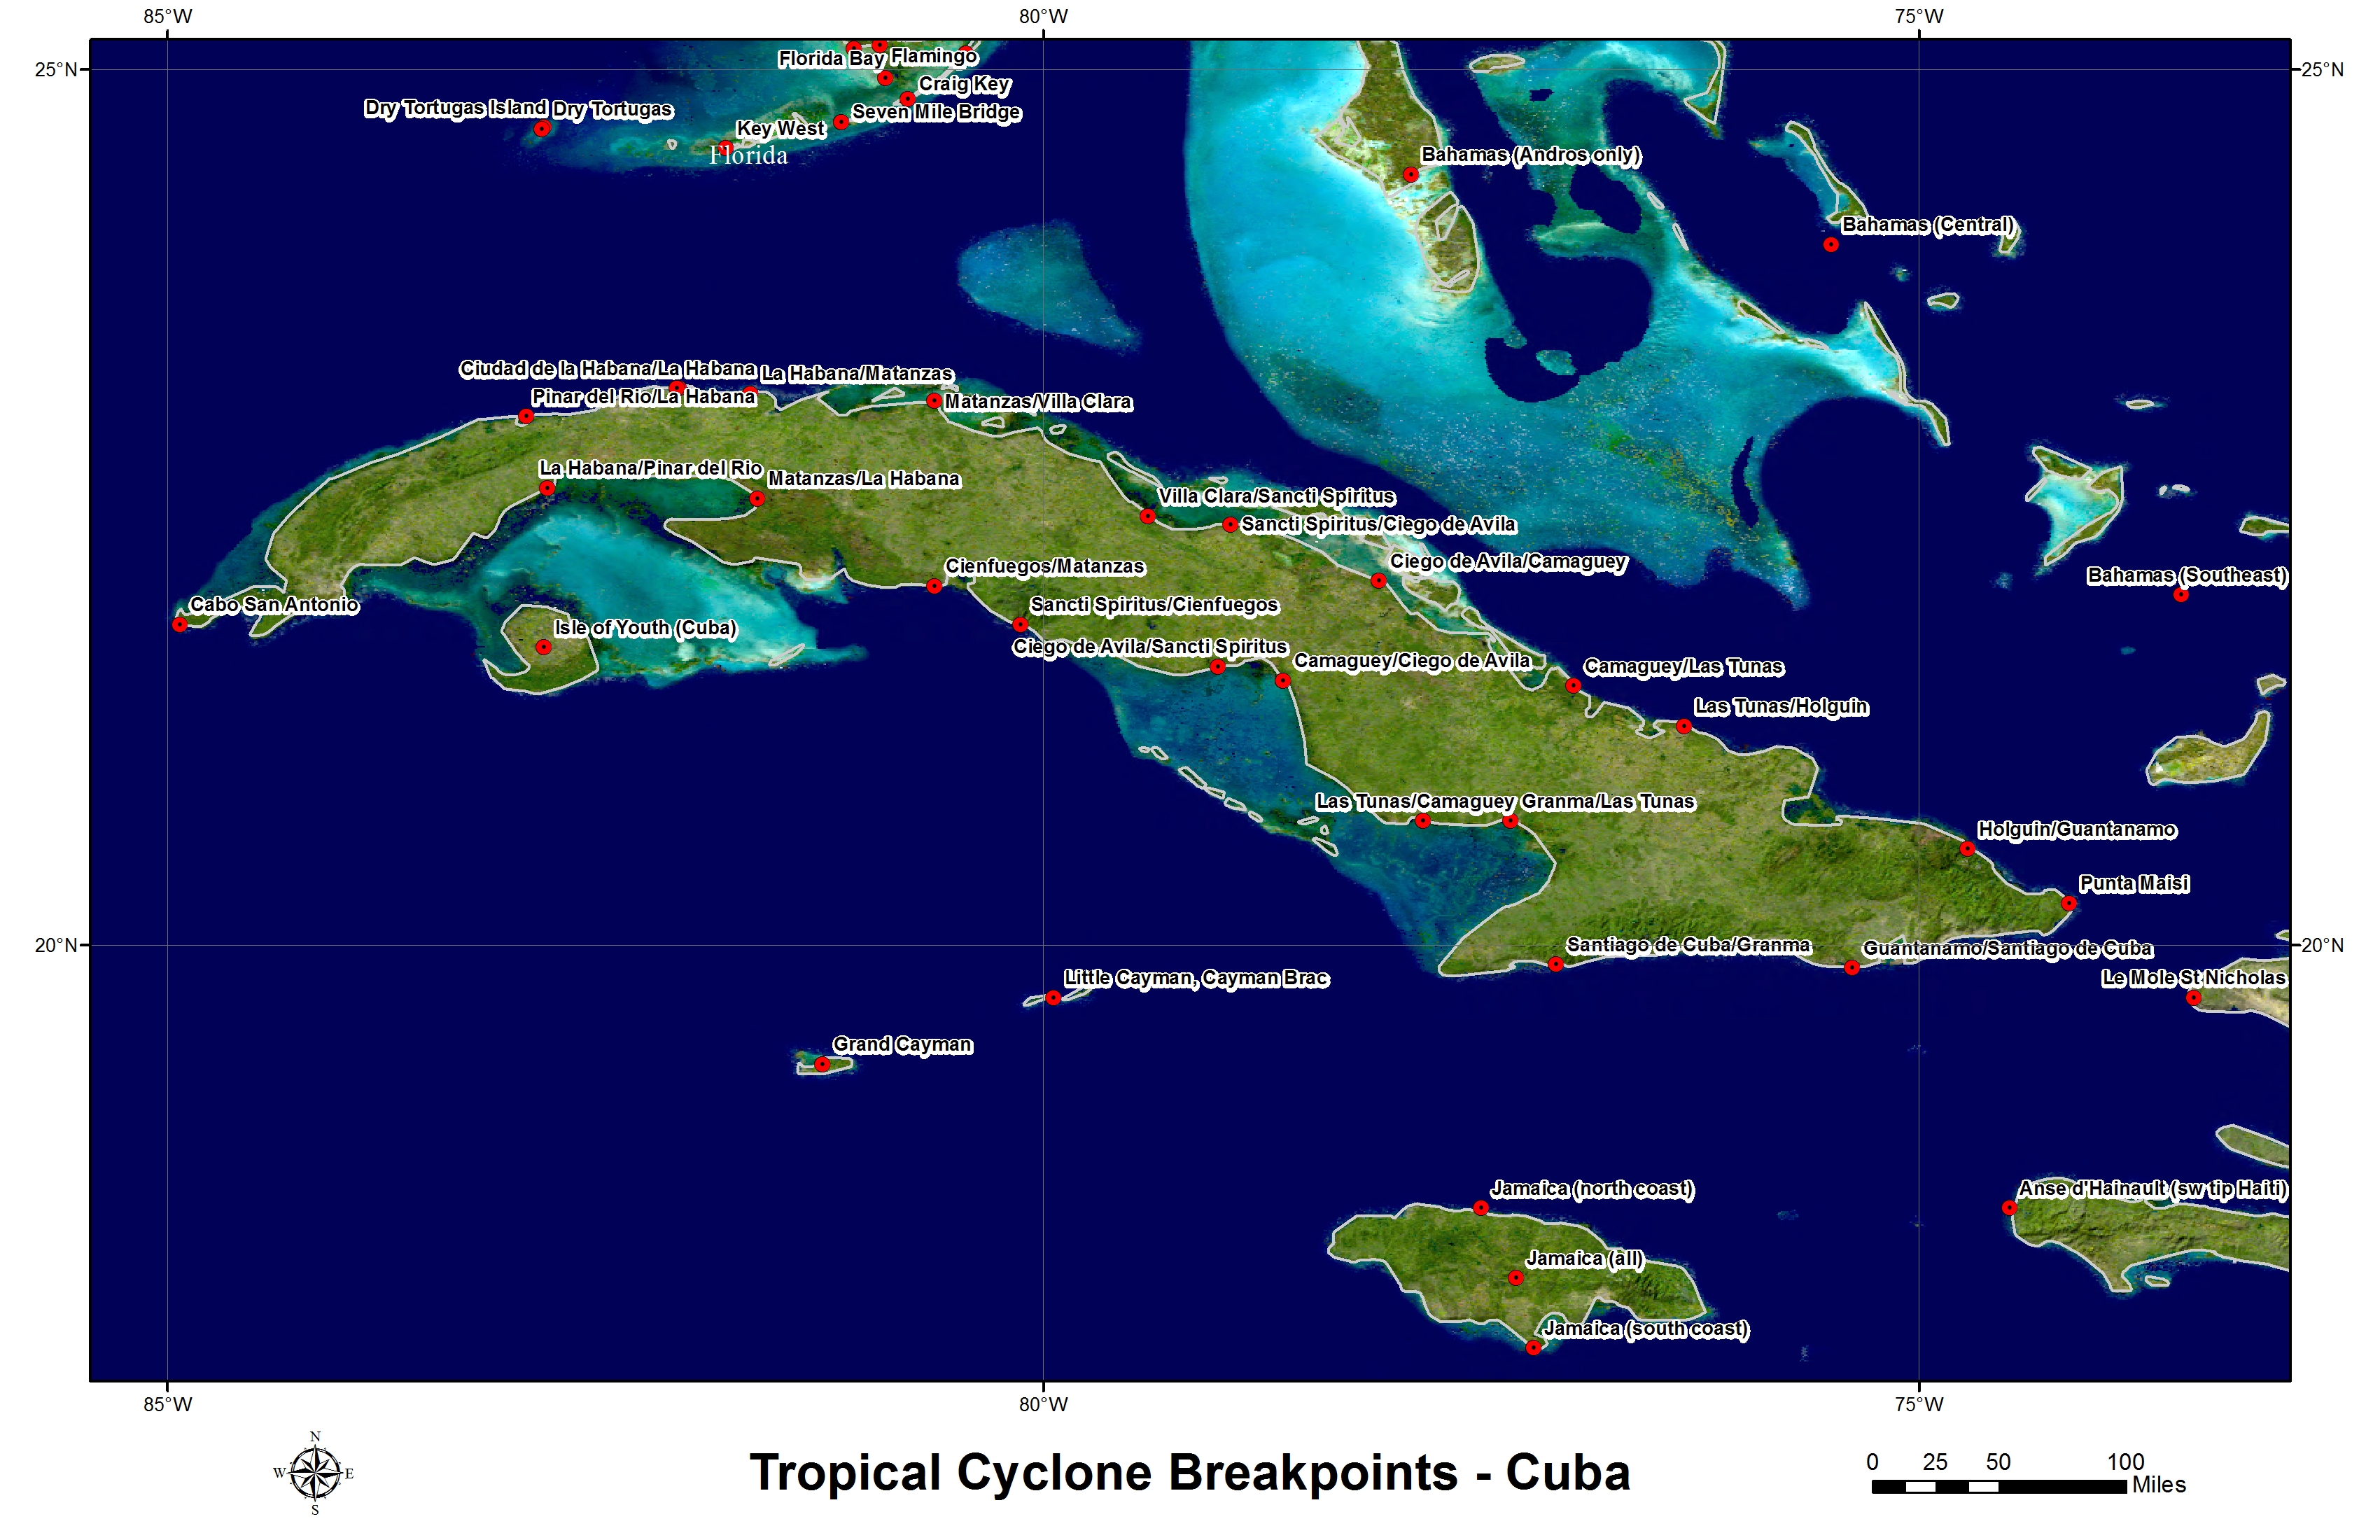 Hurricane and Tropical Storm Watch/Warning Breakpoints